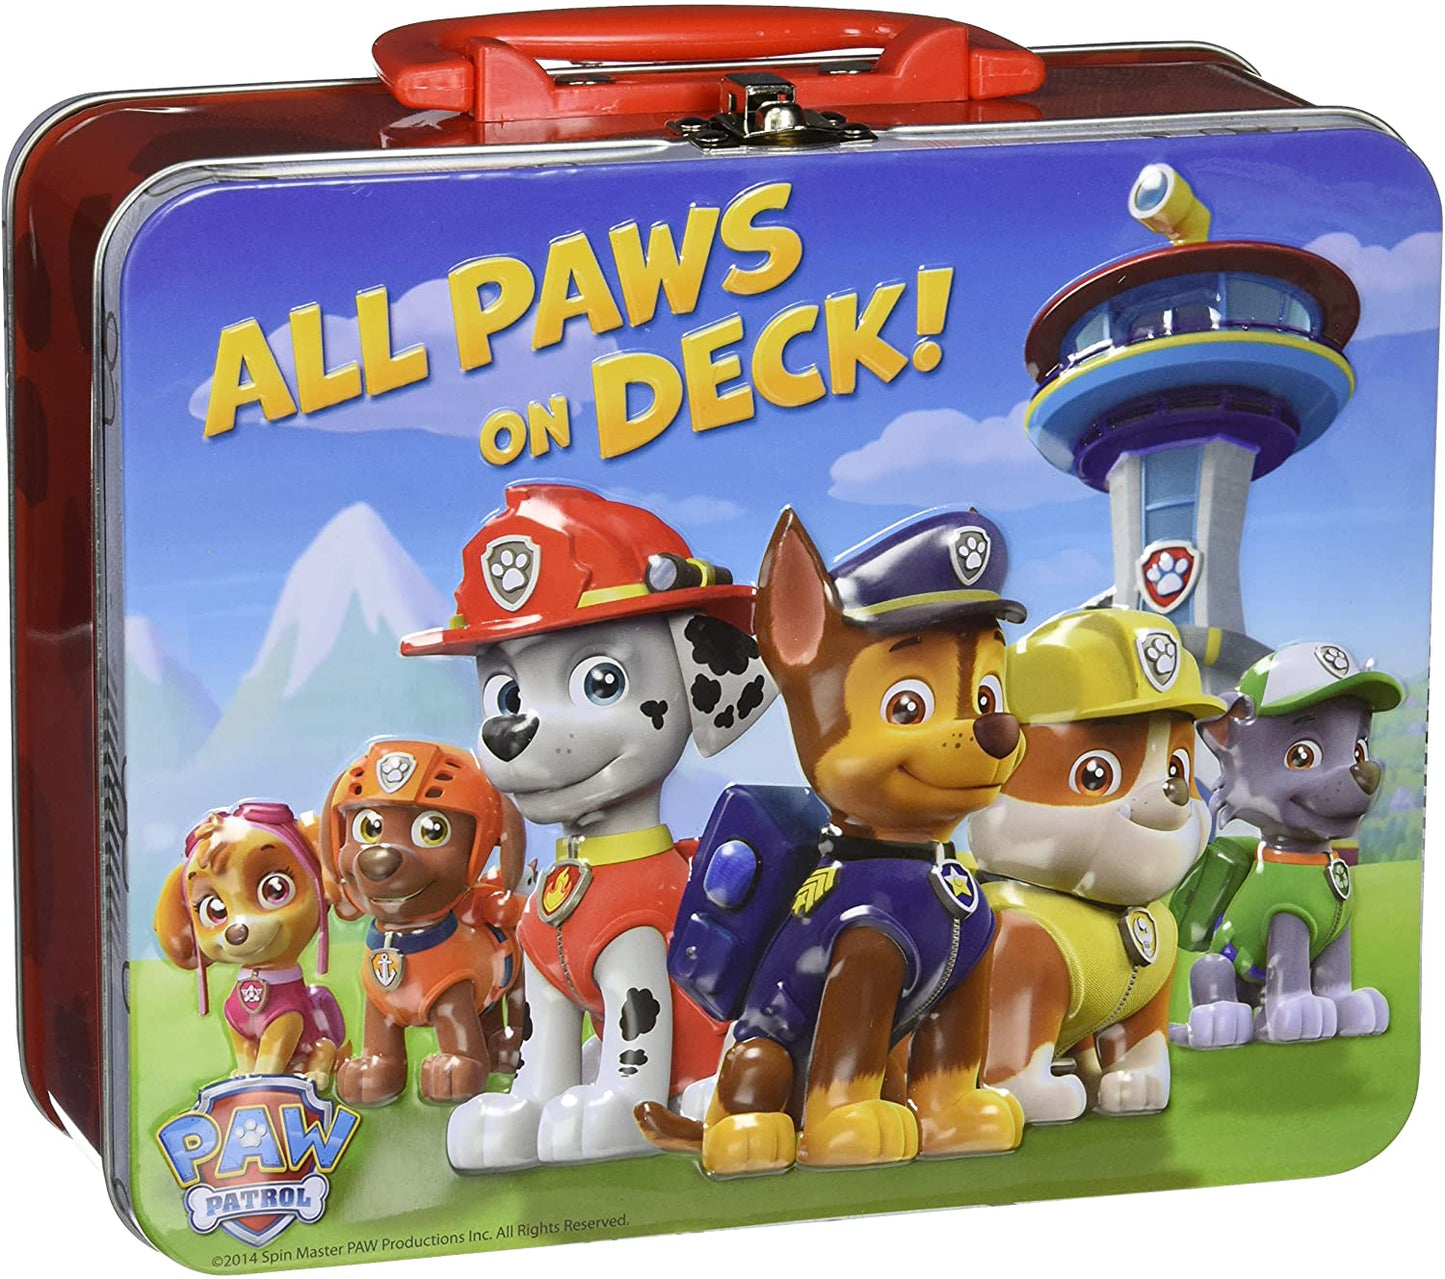 Paw Patrol on Deck Carry Lunch Tin Box, Feature Large Puzzle 24 pieces